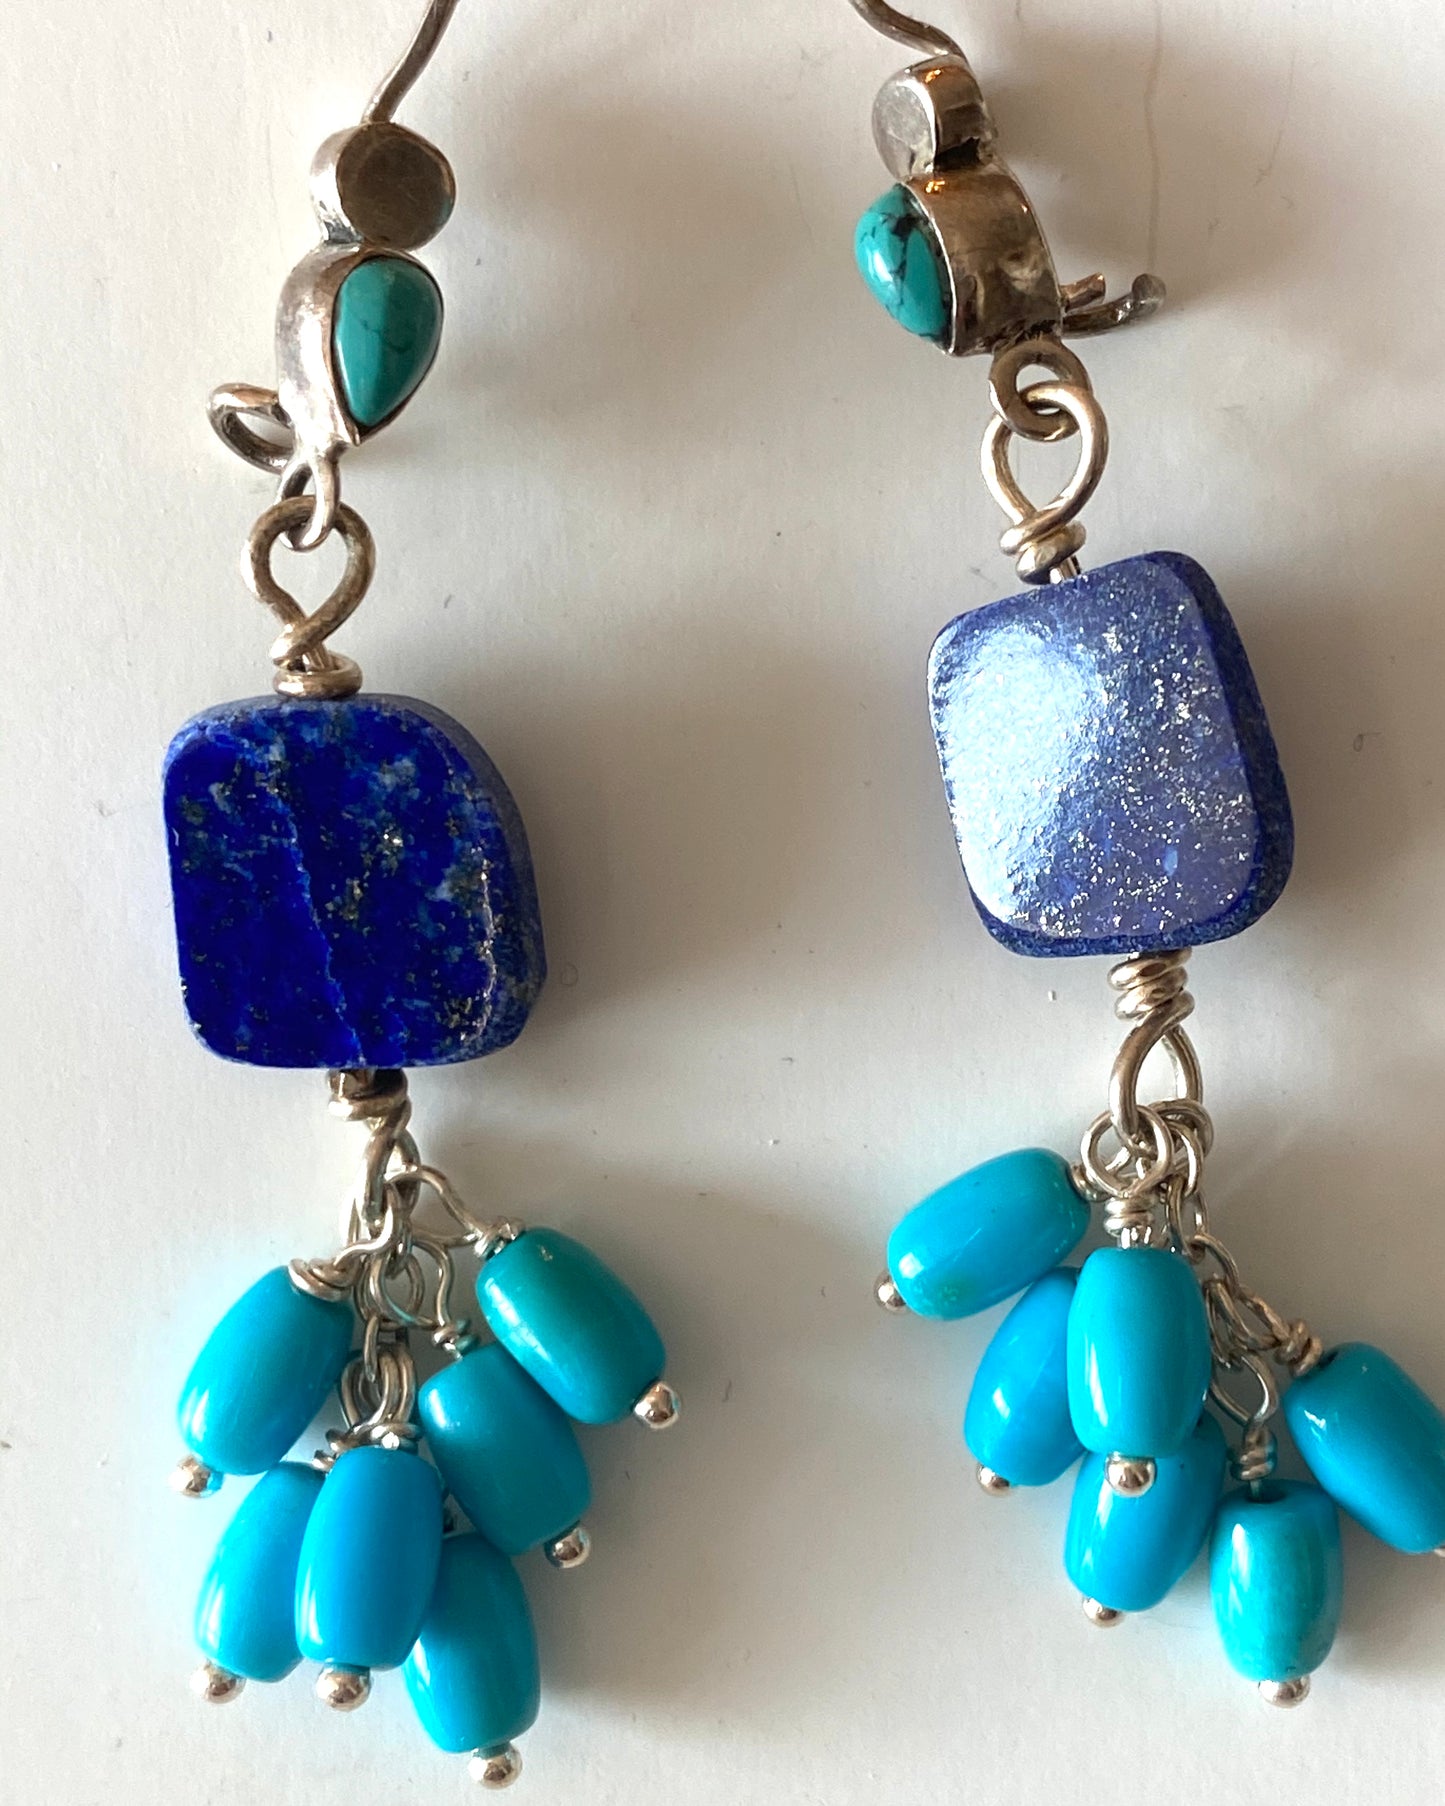 Lapis and Turquoise earrings on a sterling silver hook with turquoise stone.